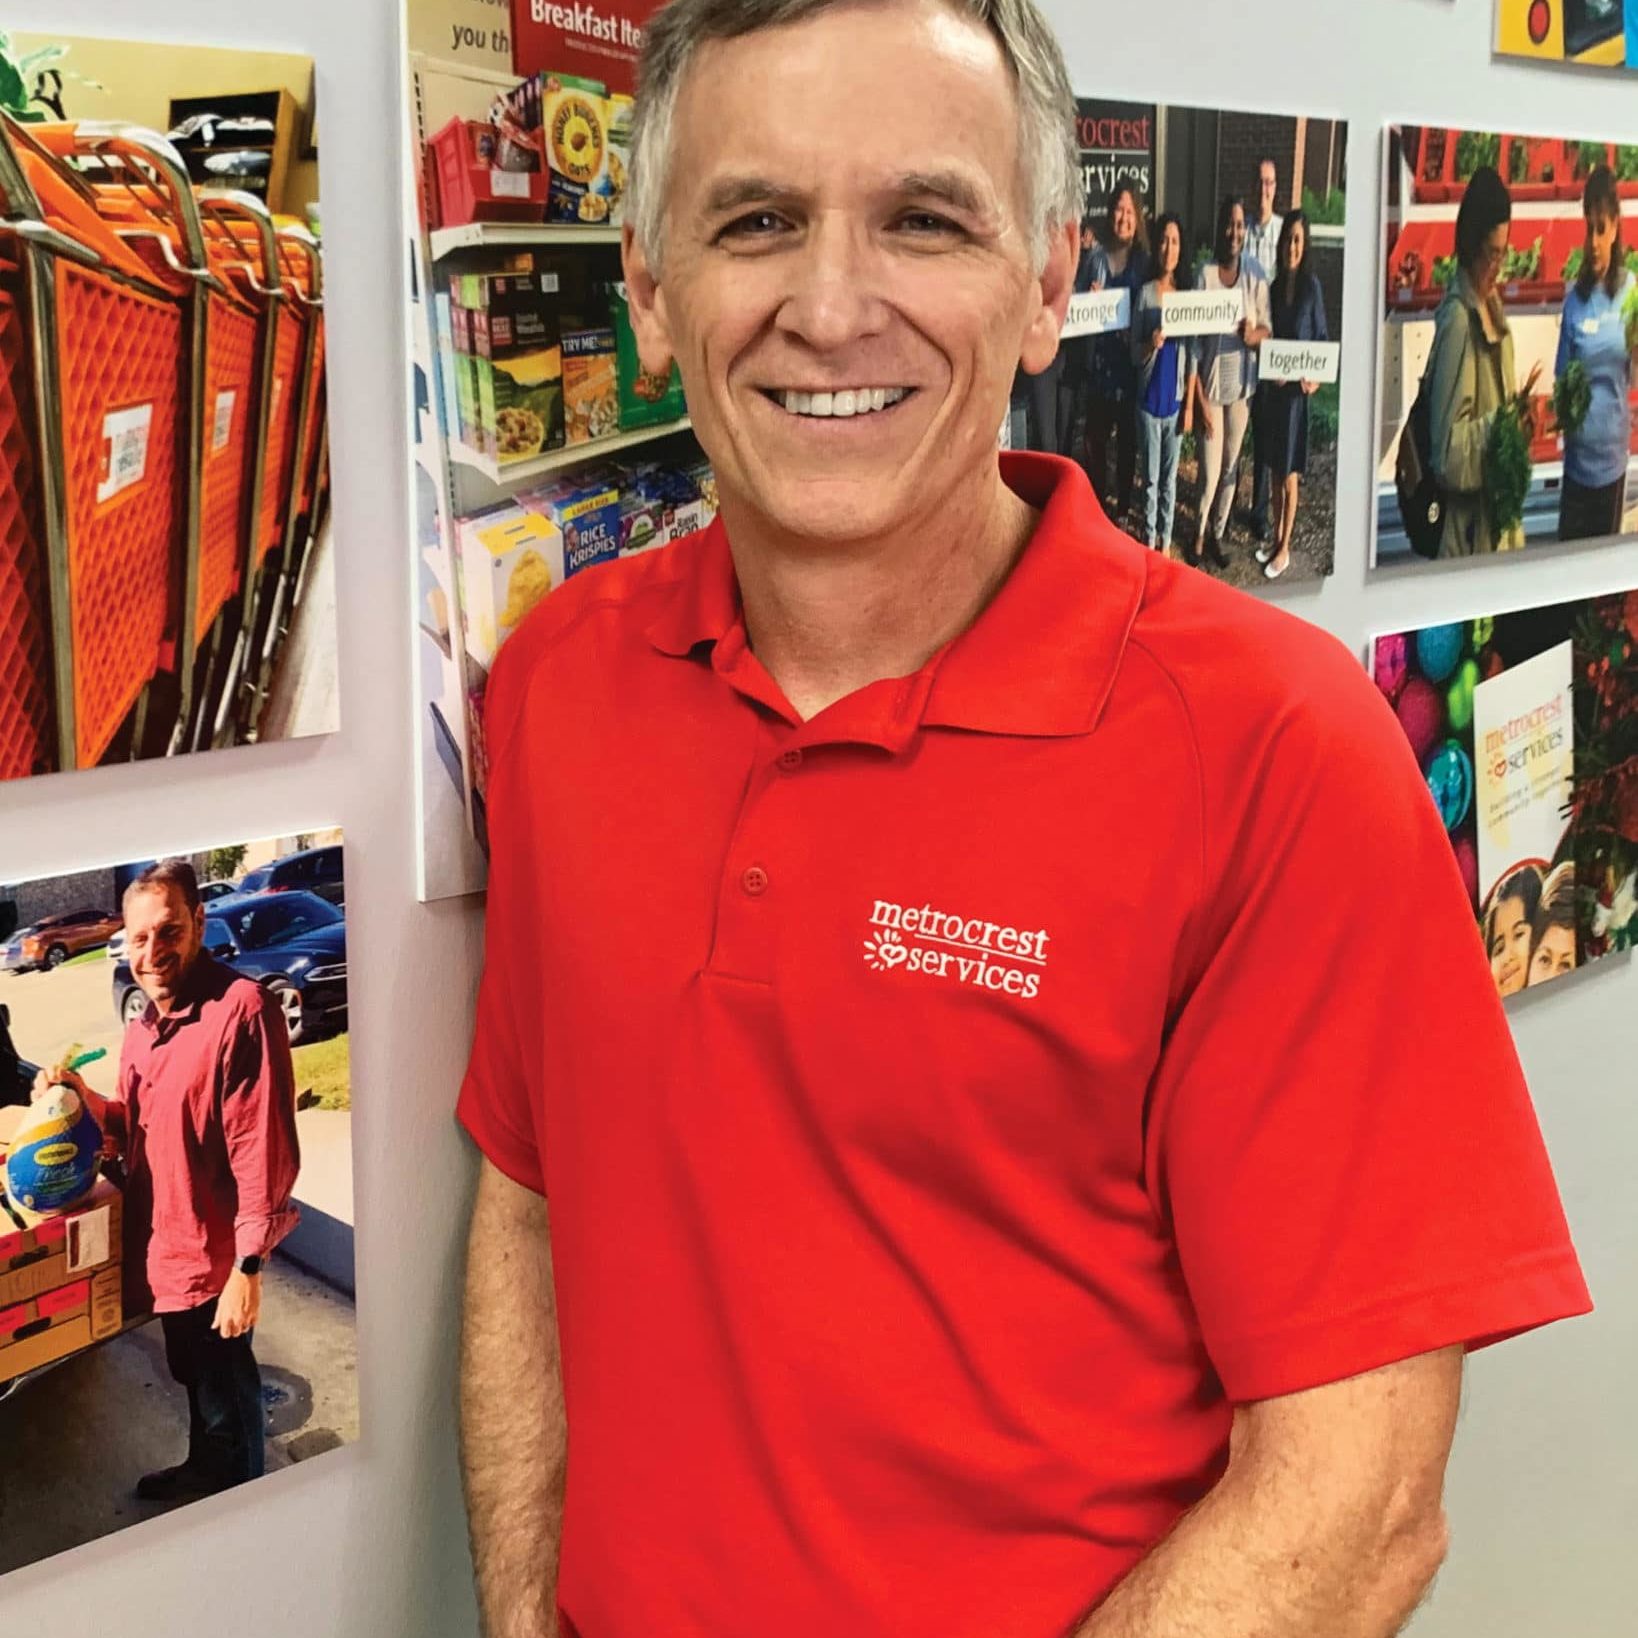 White man in a red polo shirt leaning against a wall with hanging pictures